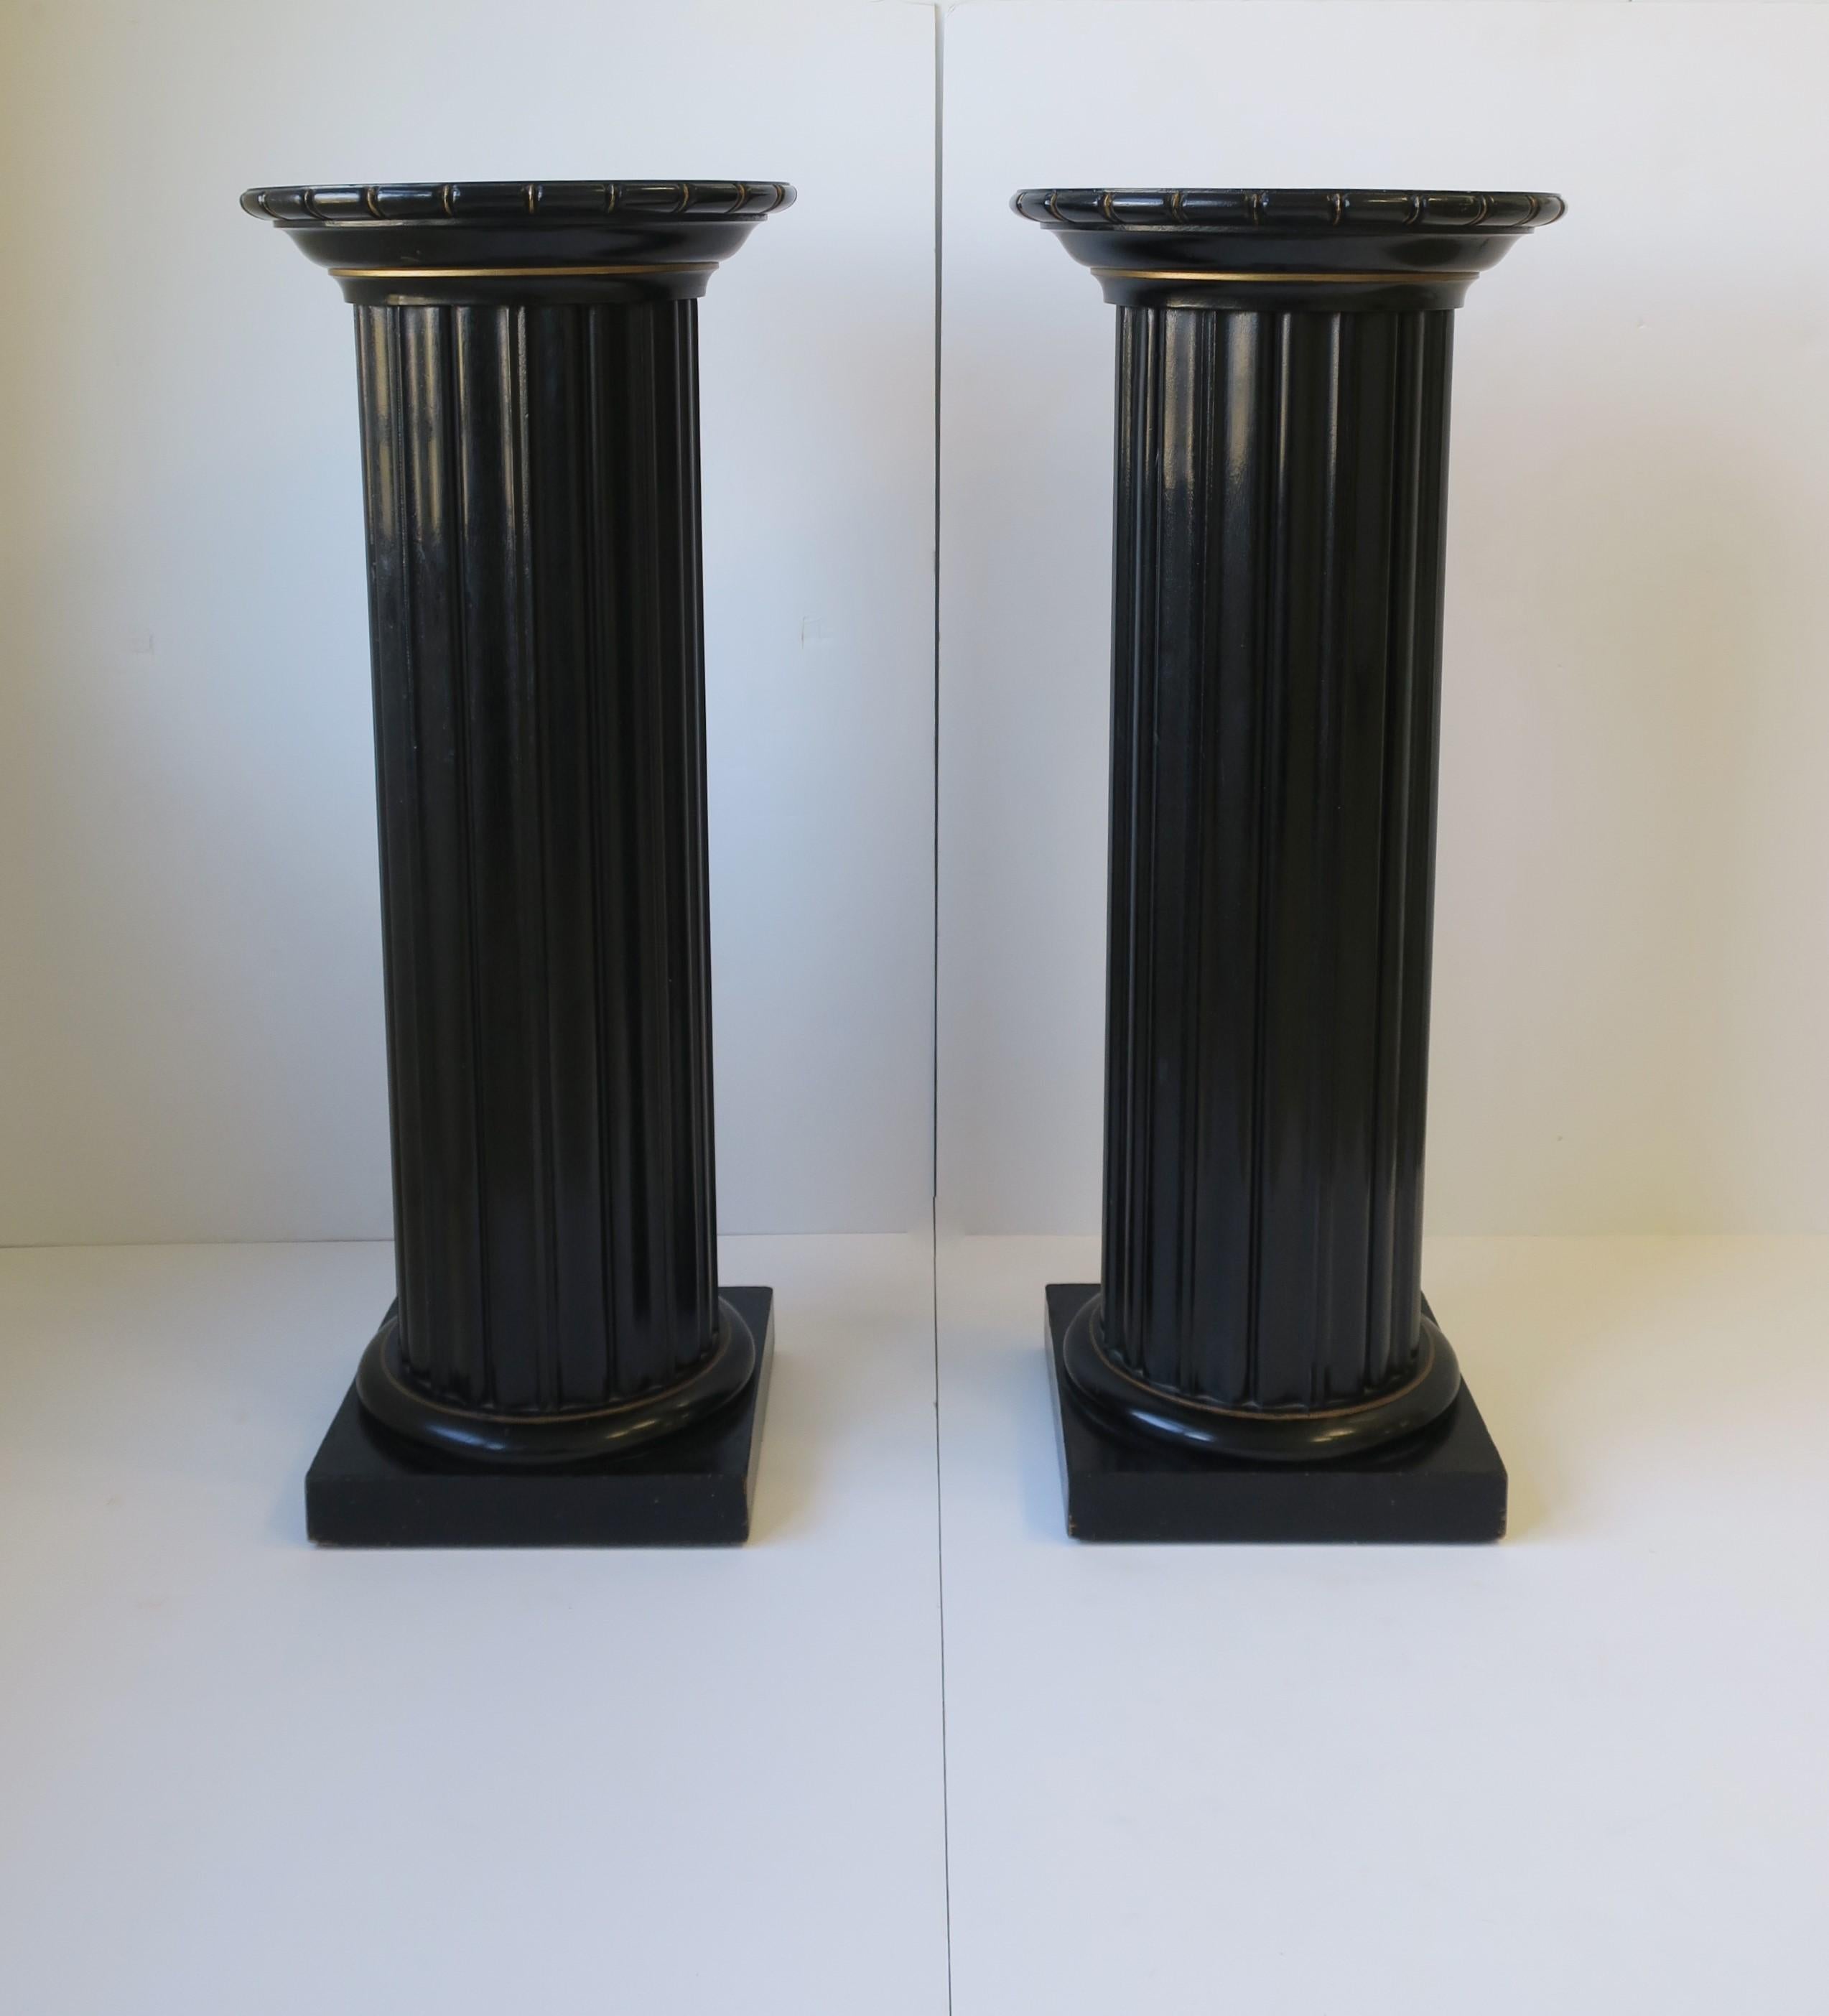 One available, as per listing. 

Beautiful European black lacquer, with touches of gold, fluted wood pillar column pedestal stand in the Neoclassical design style, circa mid-20th century, Europe. Pedestal is black lacquer with touches of gold